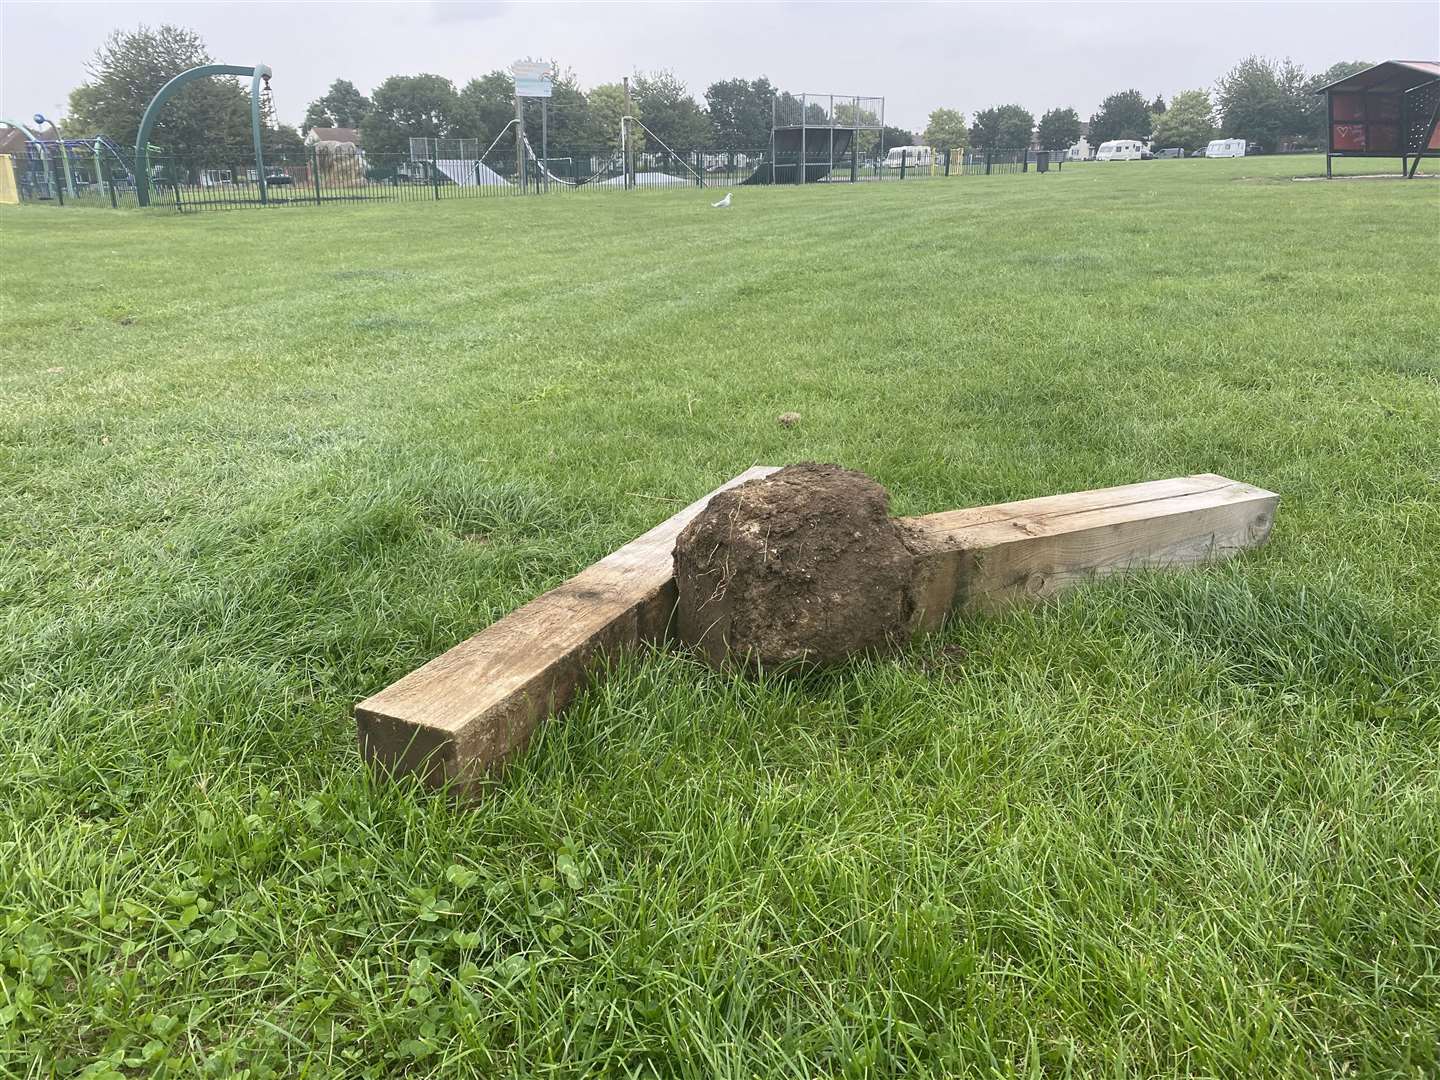 Damaged posts at Beechings playing fields where travellers arrived on Sunday night